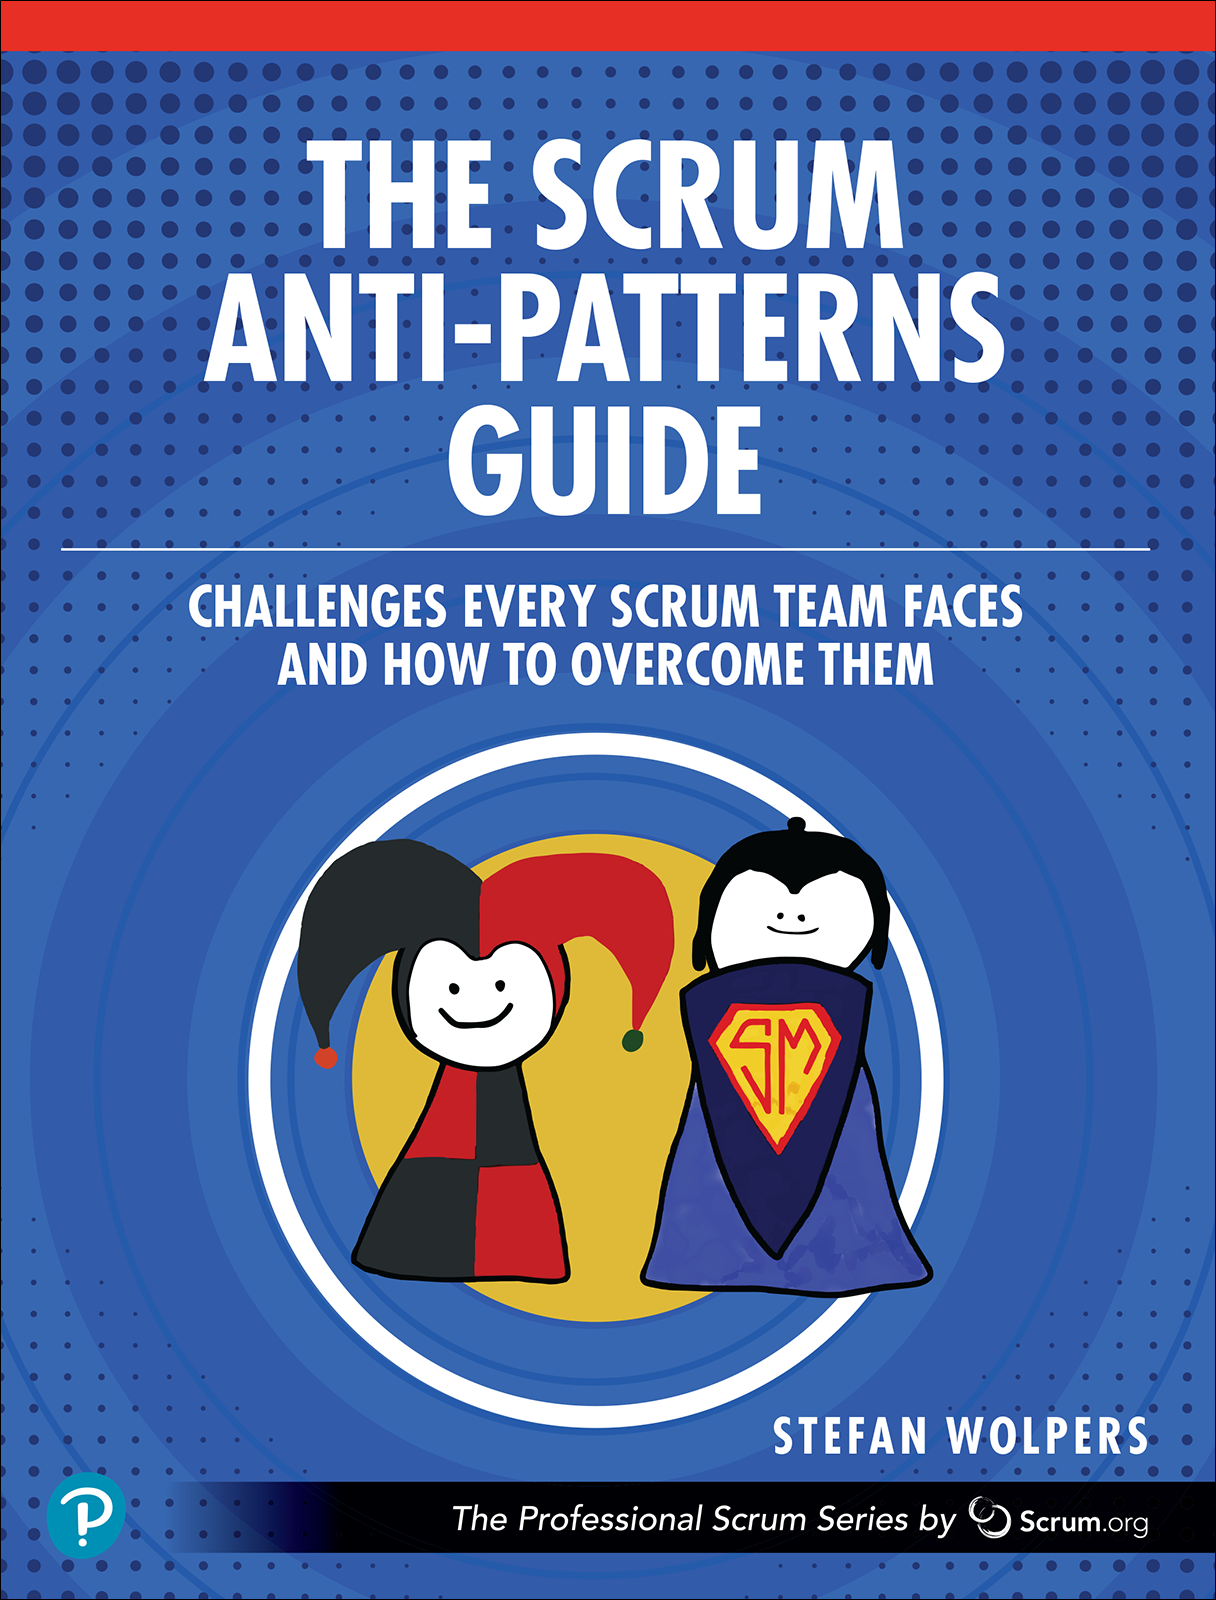 Scrum Anti-Patterns Guide by PST Stefan Wolpers